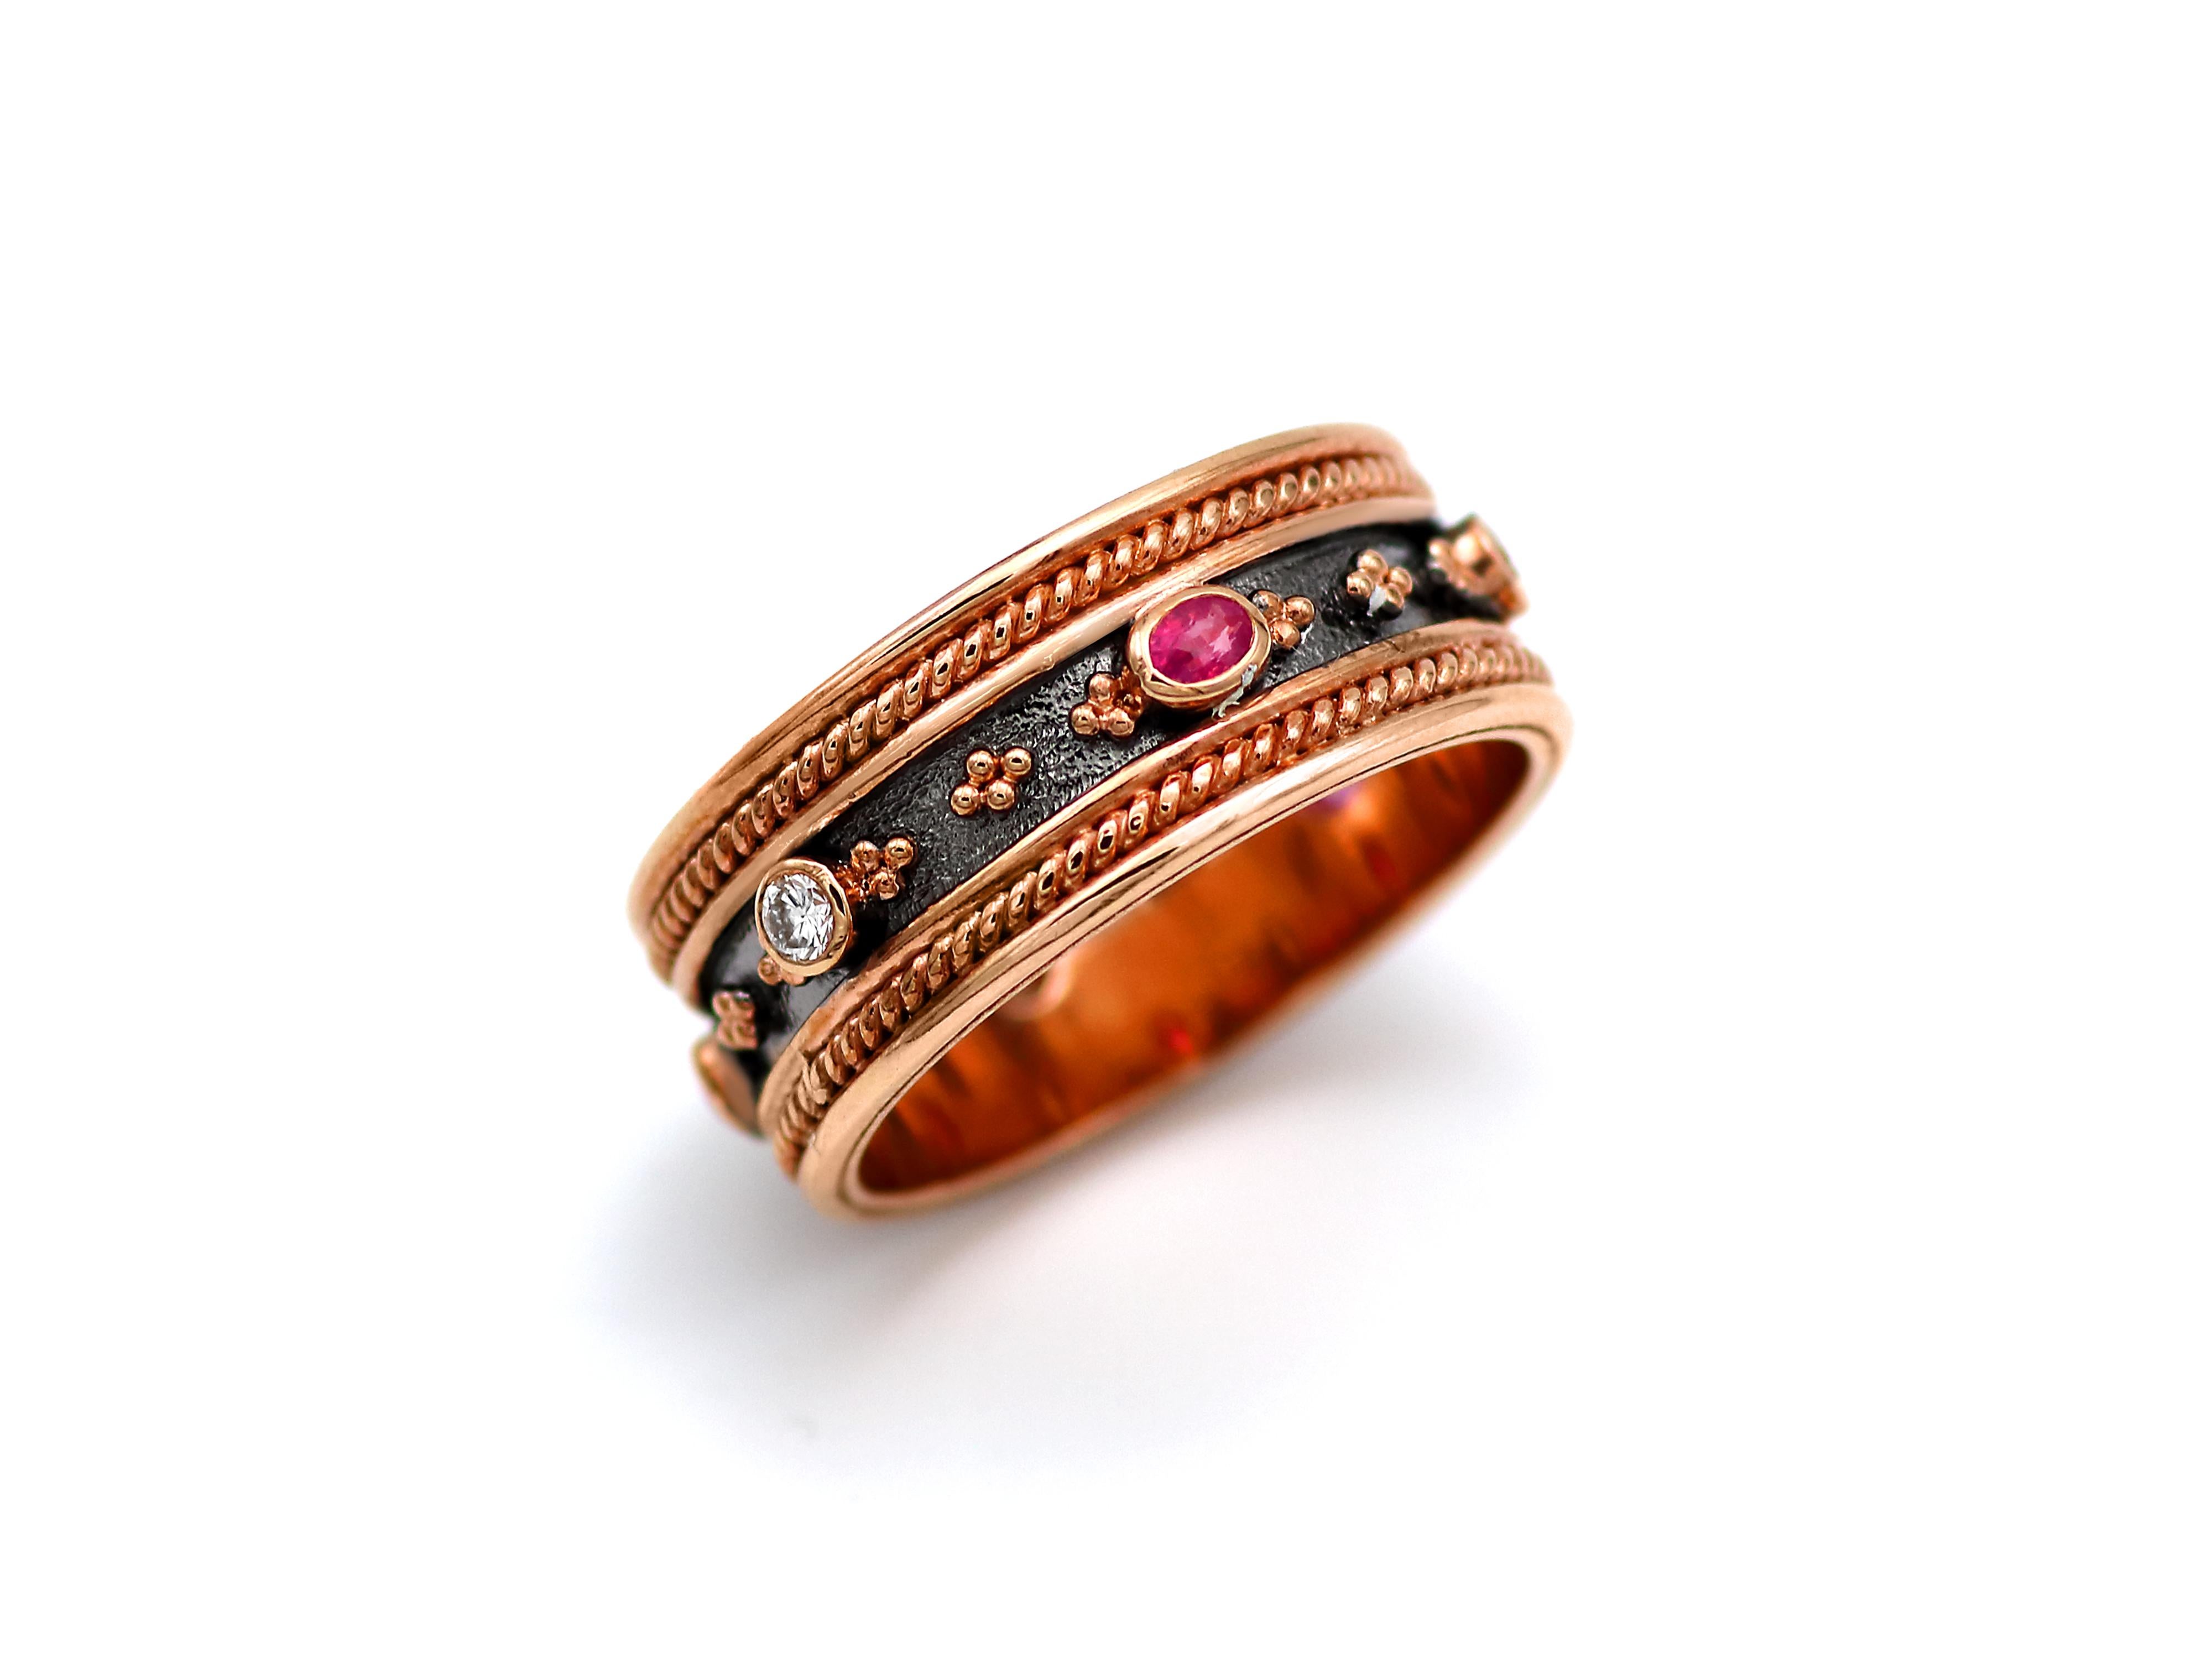 Endless Βyzantine inspired band ring of the Noir Collection handmade by Dimos in 18 karat rose gold and set with three oval 0.15 carats rubies and three round 0.15 carats not graded brilliant cut diamonds. A combination that brings out the redness